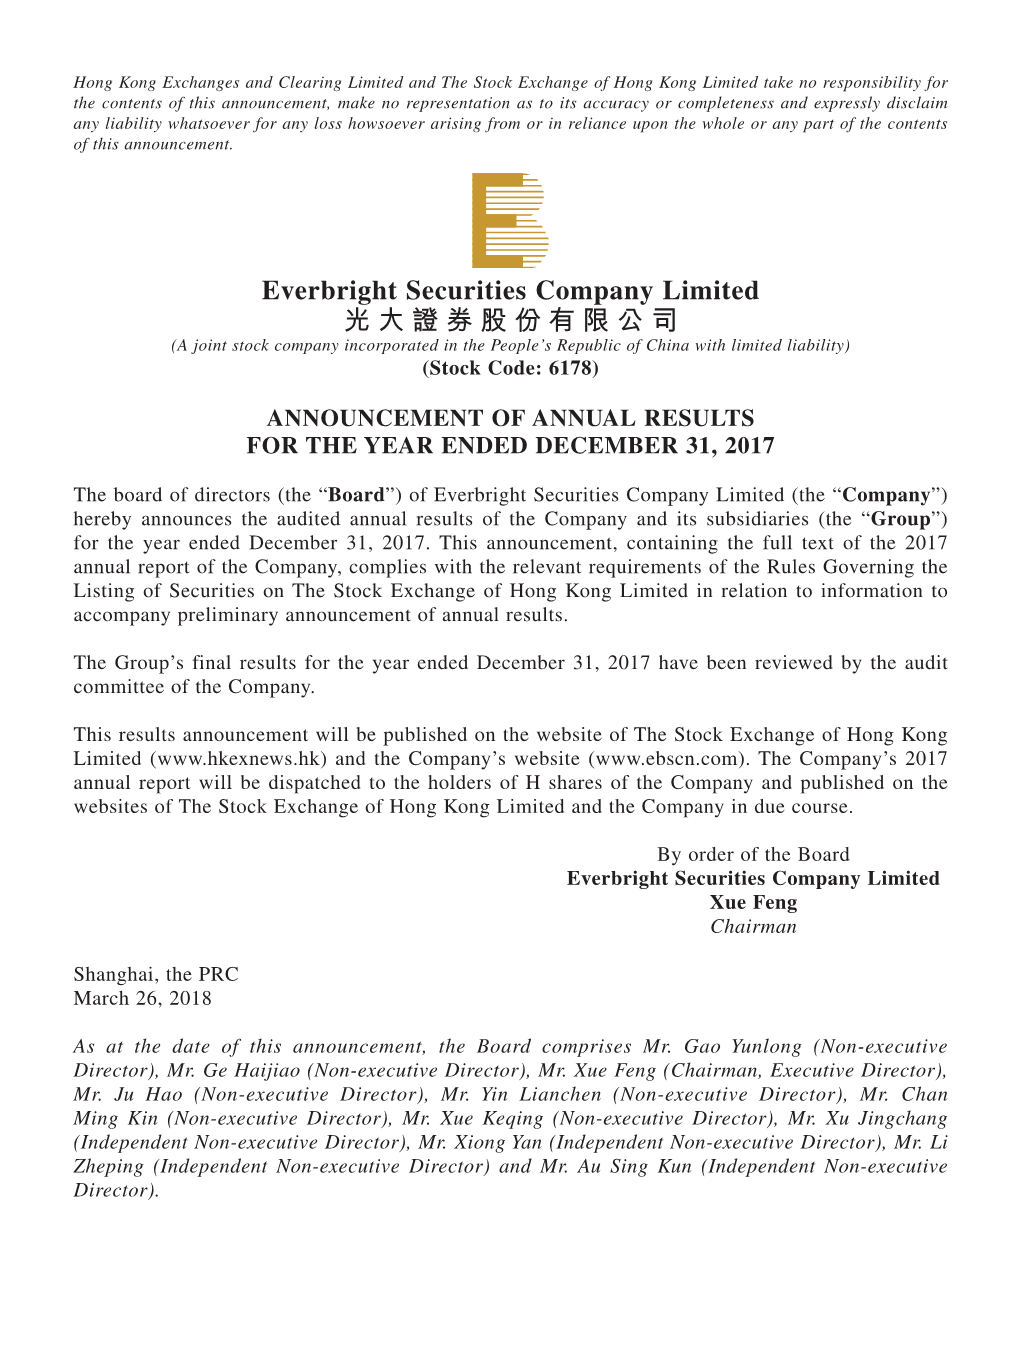 Everbright Securities Company Limited 光大證券股份有限公司 (A Joint Stock Company Incorporated in the People’S Republic of China with Limited Liability) (Stock Code: 6178)